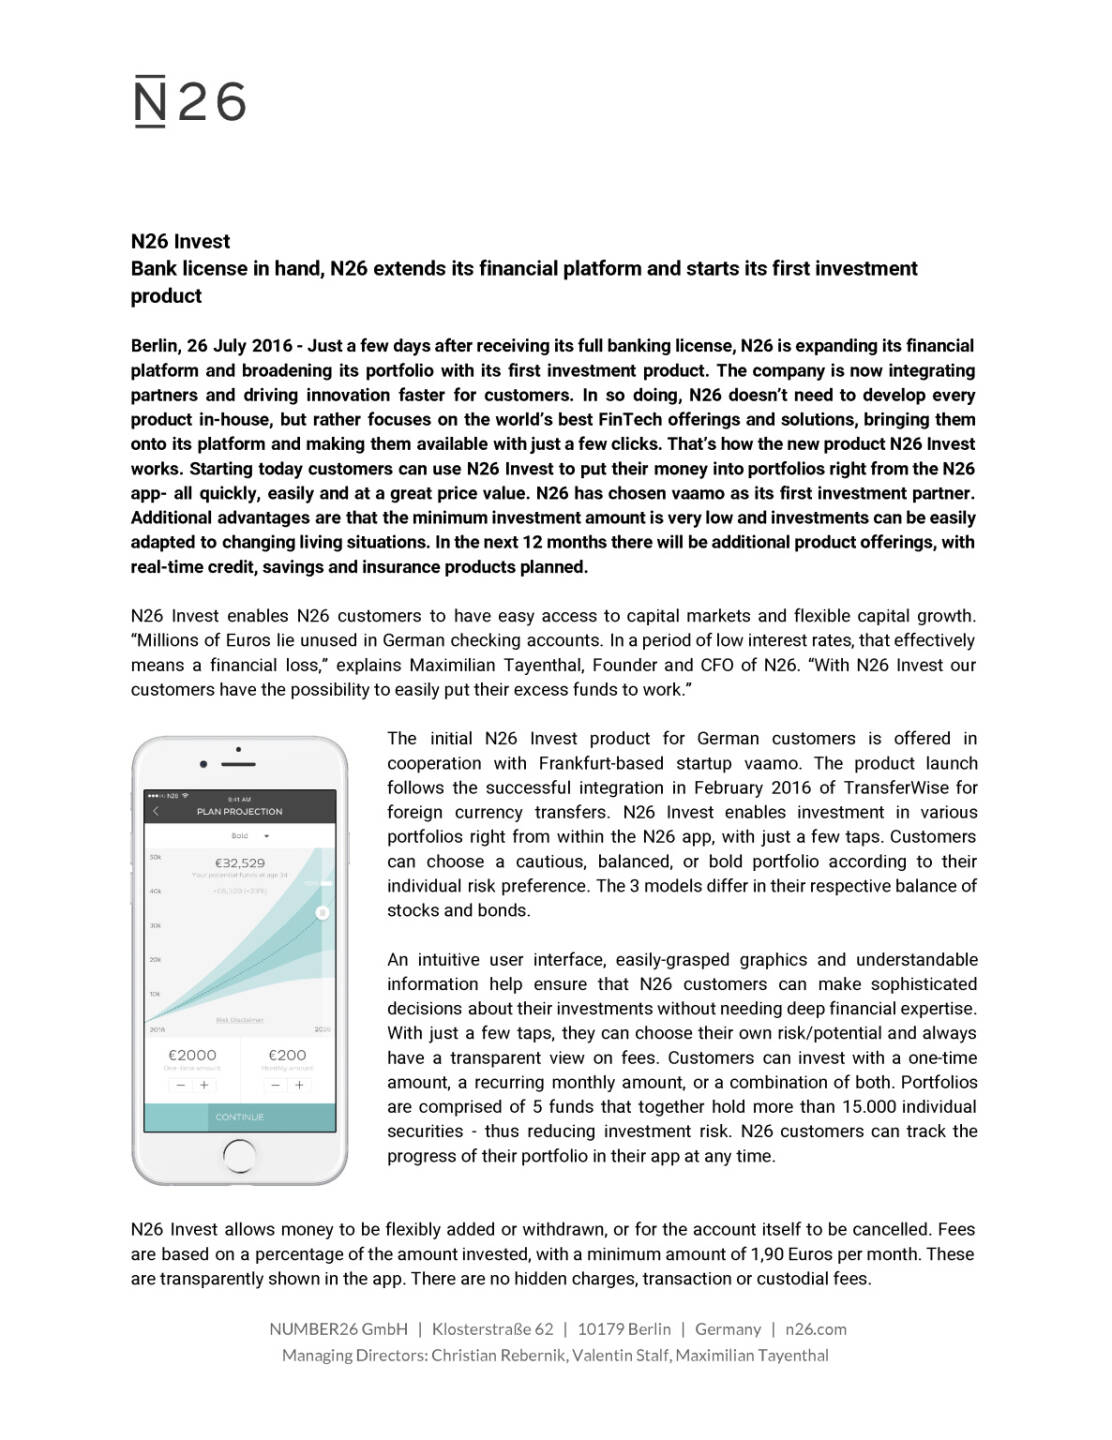 N26 offers first investment product on their financial plattform, Seite 1/2, komplettes Dokument unter http://boerse-social.com/static/uploads/file_1484_n26_offers_first_investment_product_on_their_financial_plattform.pdf